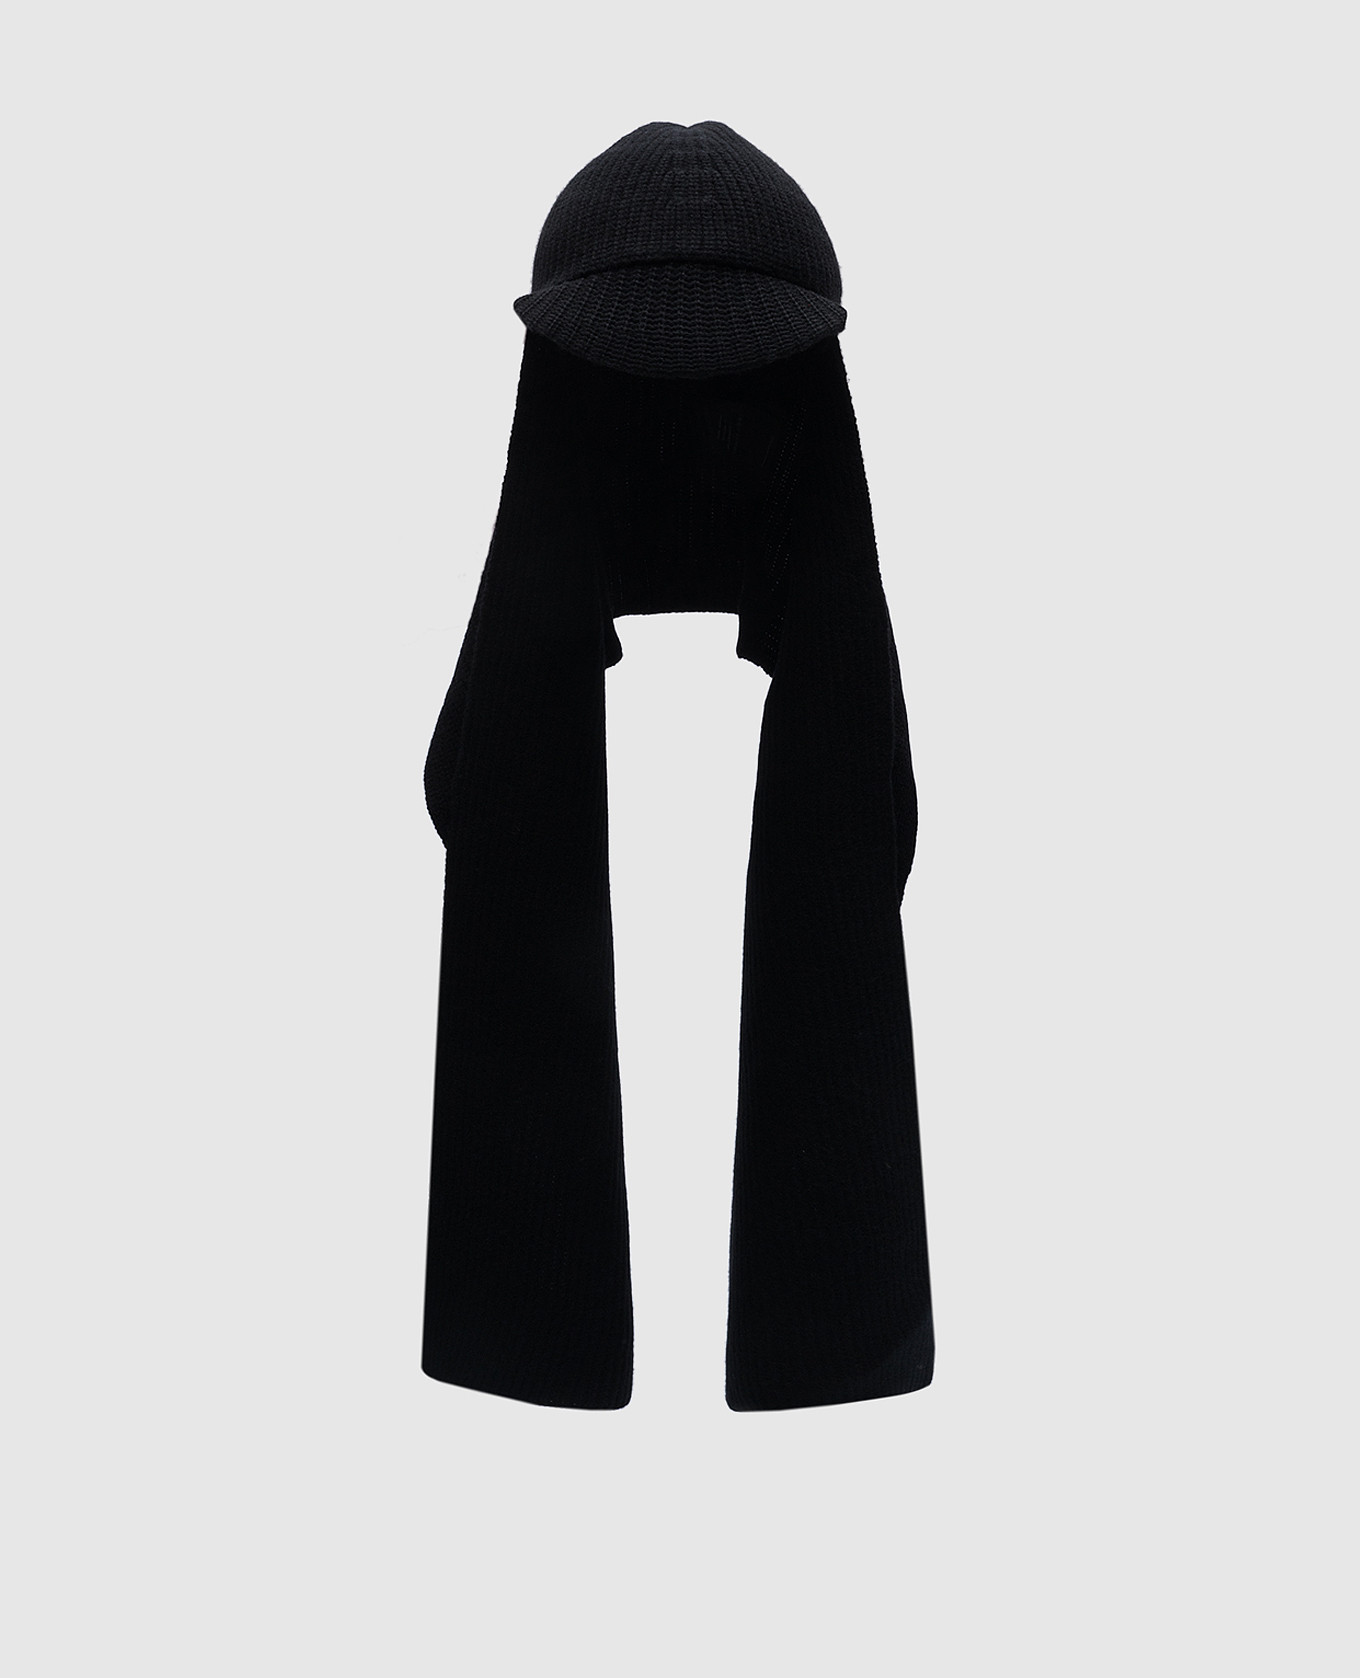 Black hat with a scarf made of wool and cashmere